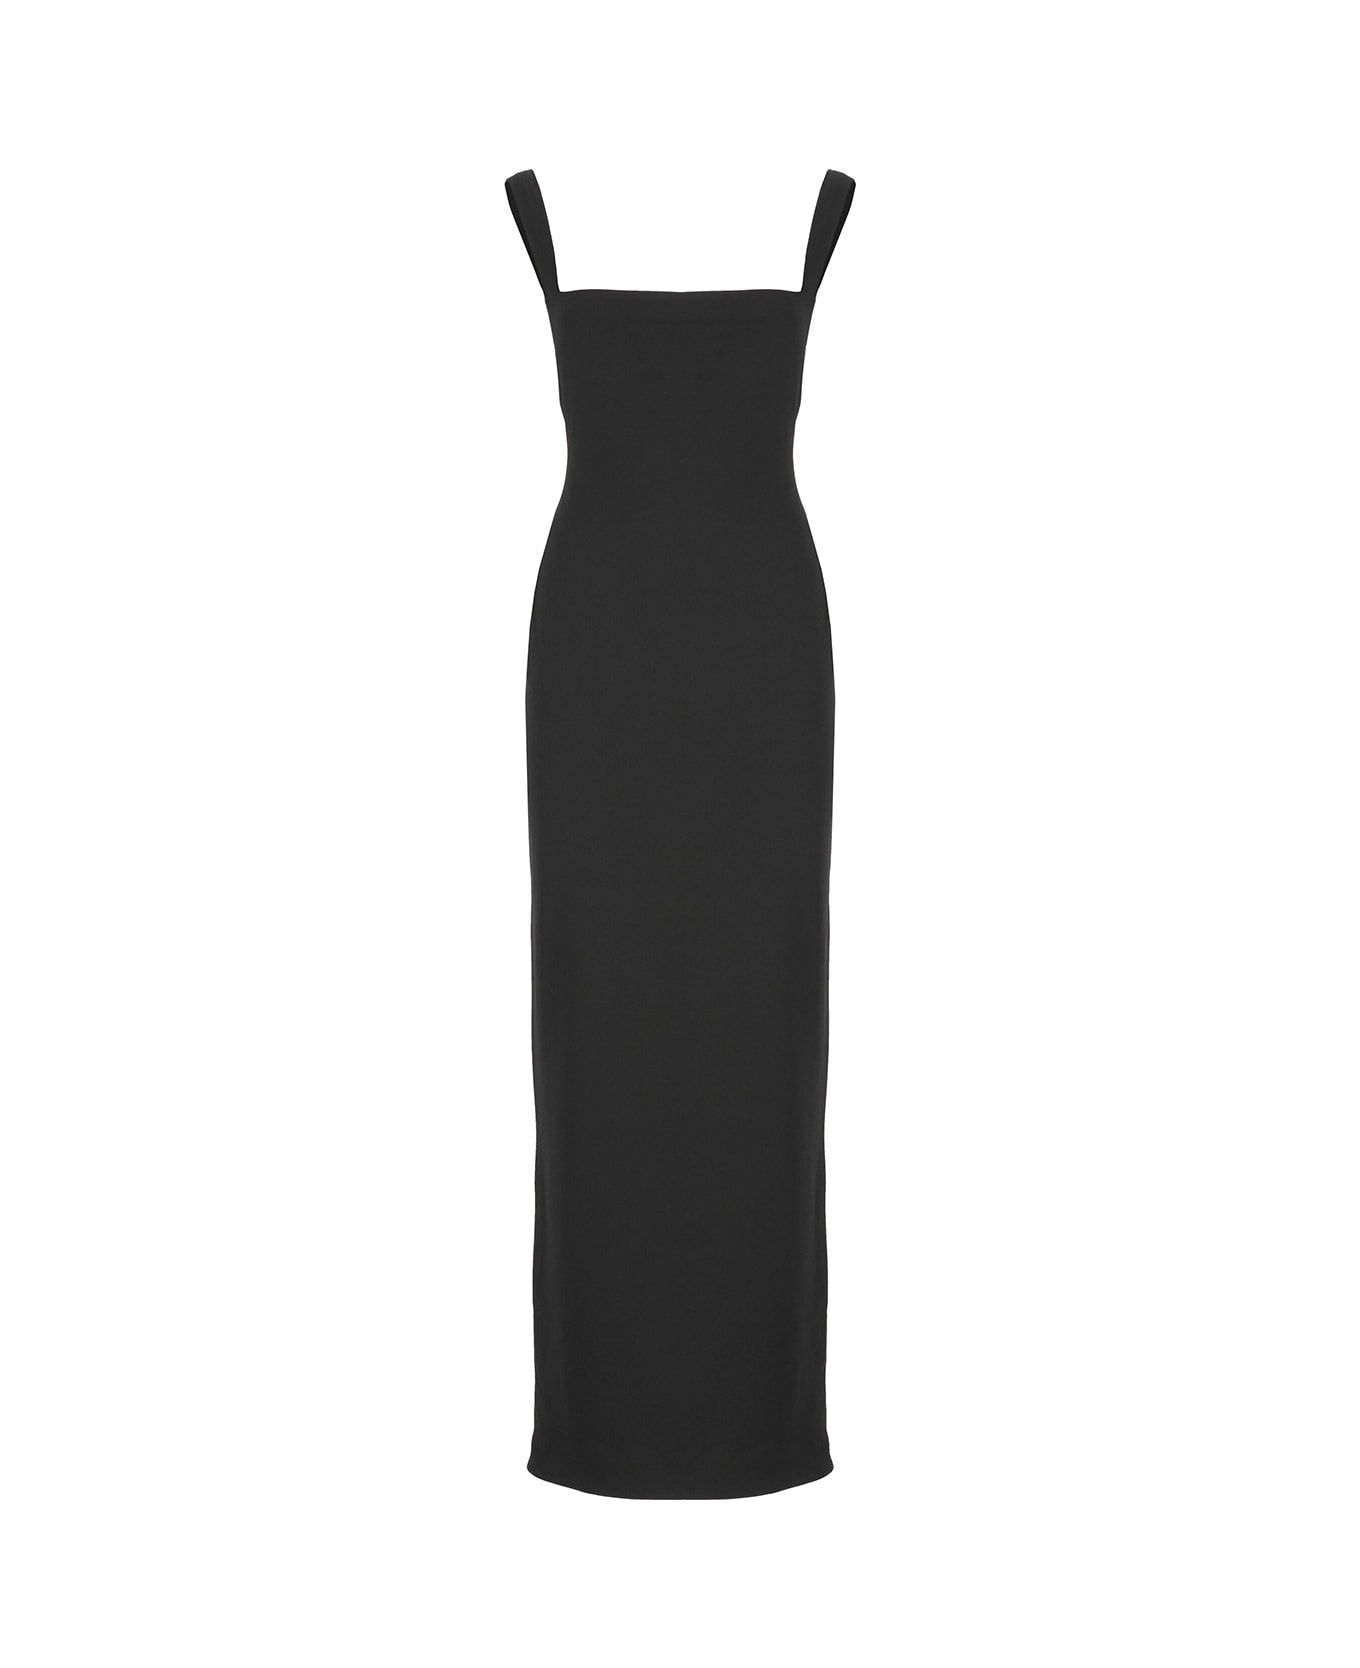 Solace London 'joni' Black Maxi Dress With Square Neck And Open Back Woman - Black